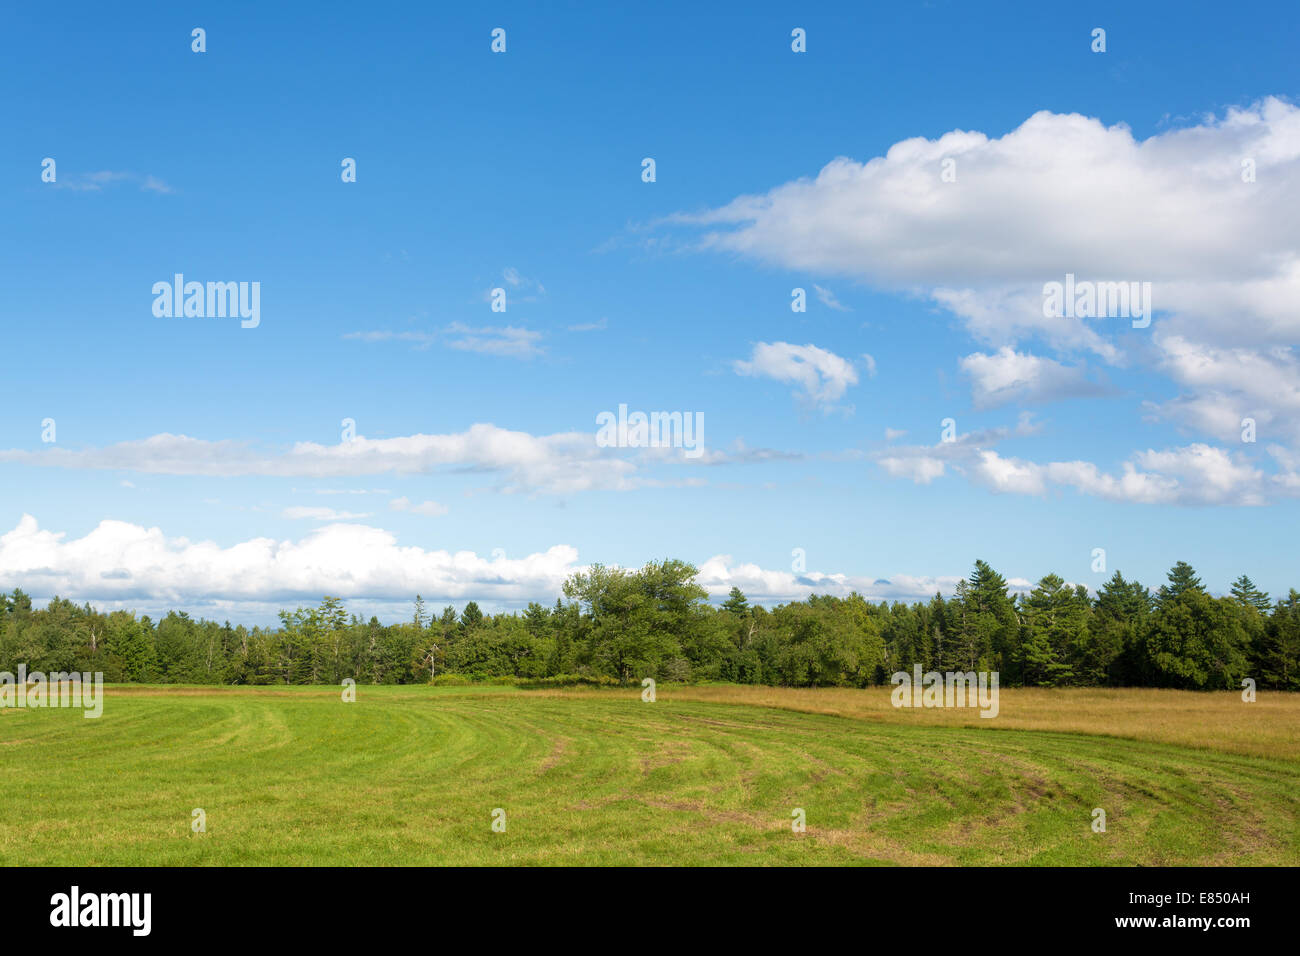 A rural farm field in Maine that has been partially mowed with distant trees and cloudy skies. Stock Photo